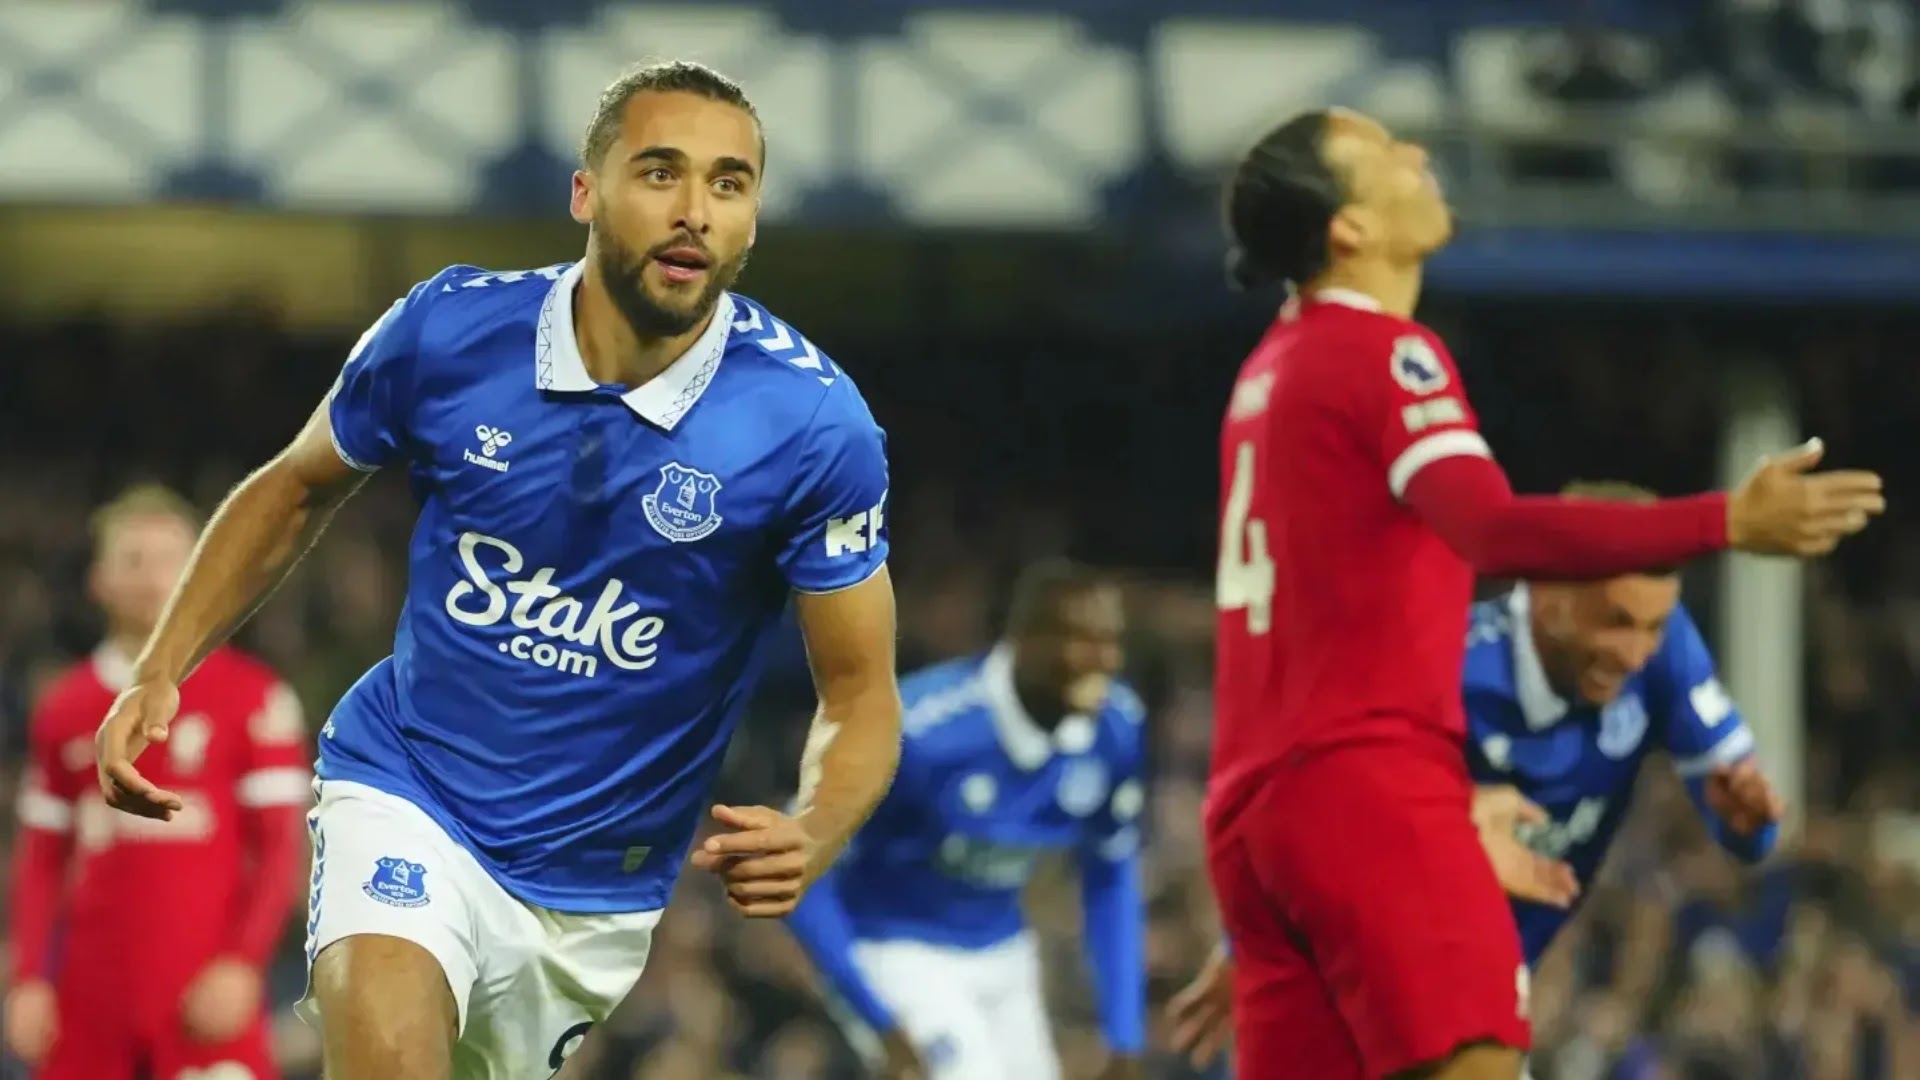 Liverpool's Premier League title hopes hit by 2-0 loss to Everton. Man United survives another scare